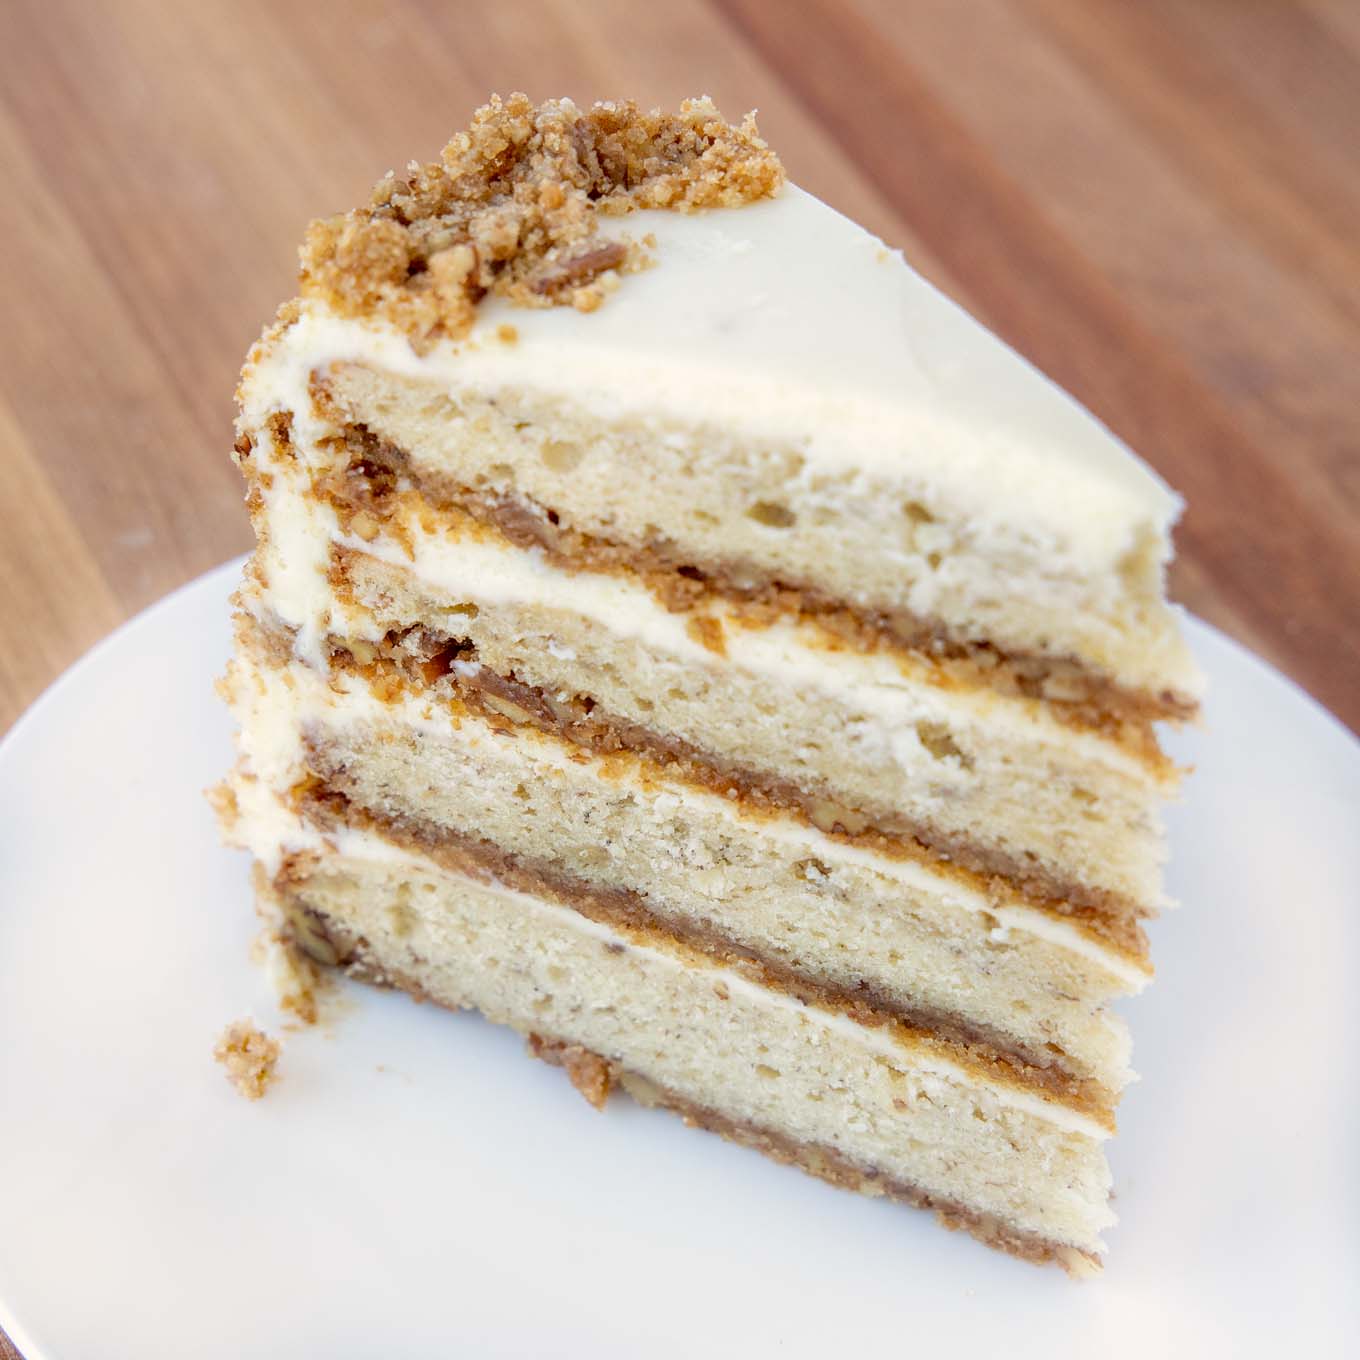 slice of four layer banana crunch cake on a white plate